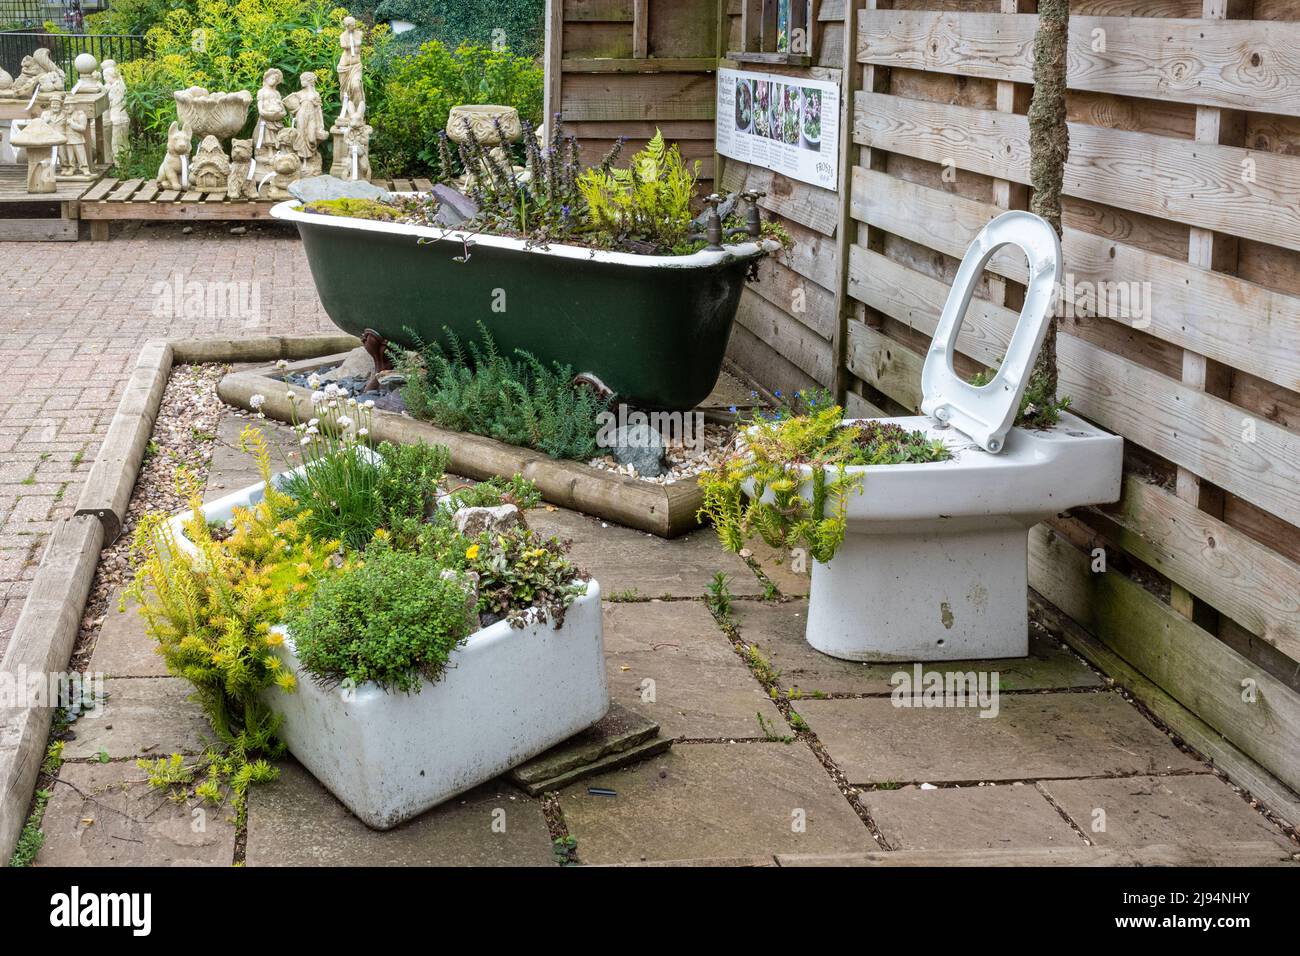 Toilet, bath and basin (old bathroom suite) planted with alpine plants as a garden centre display, UK. Upcycling concept Stock Photo